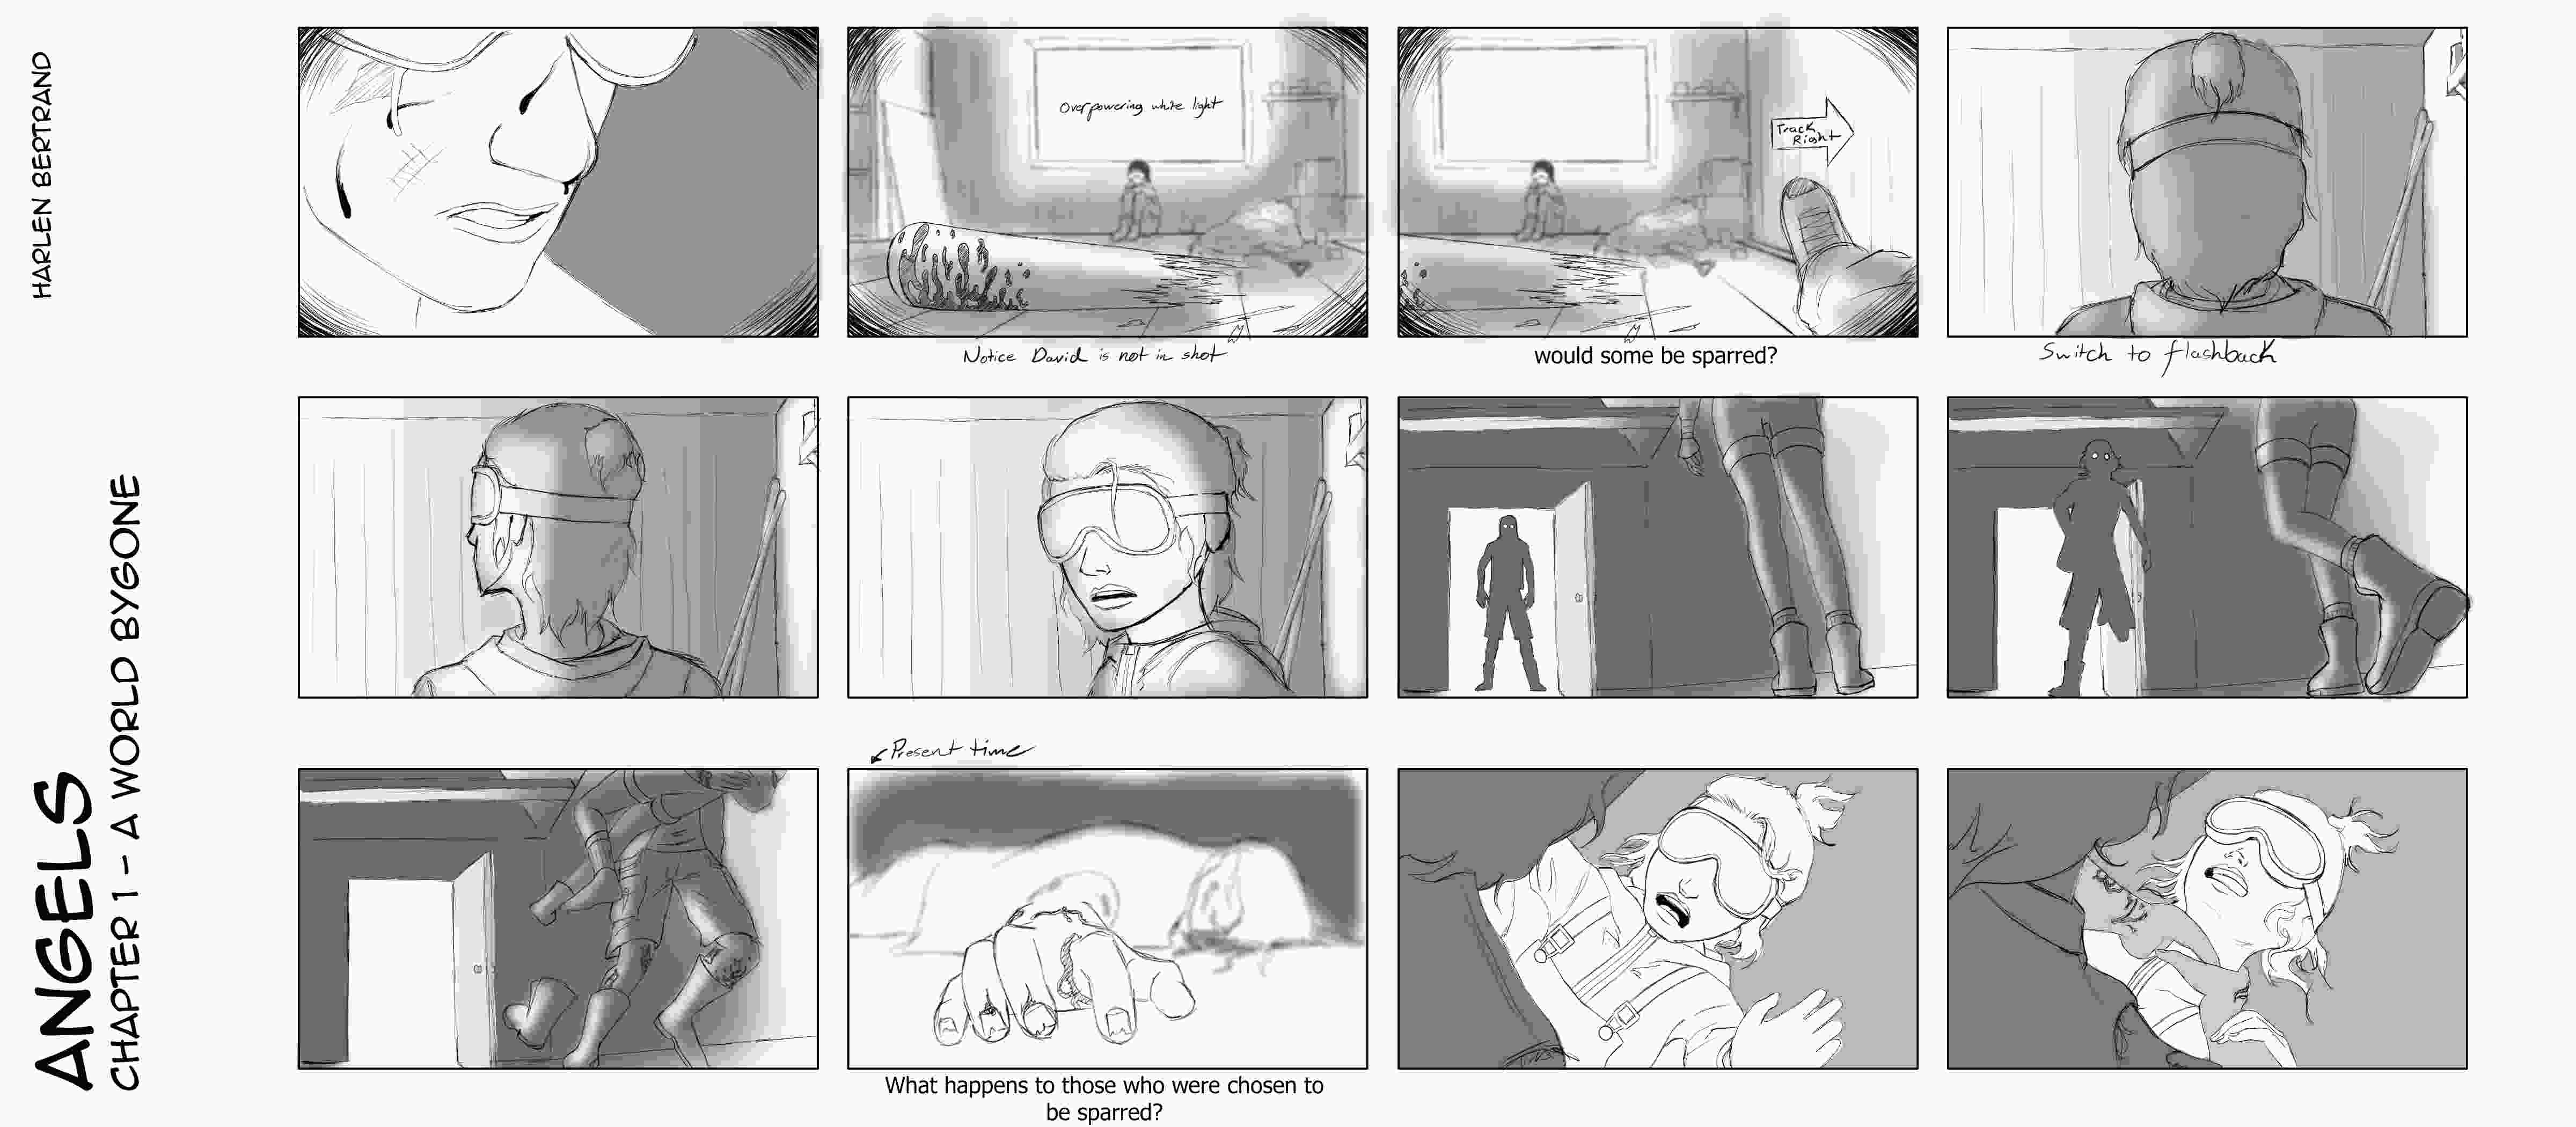 Page 2 of the Angels Storyboard